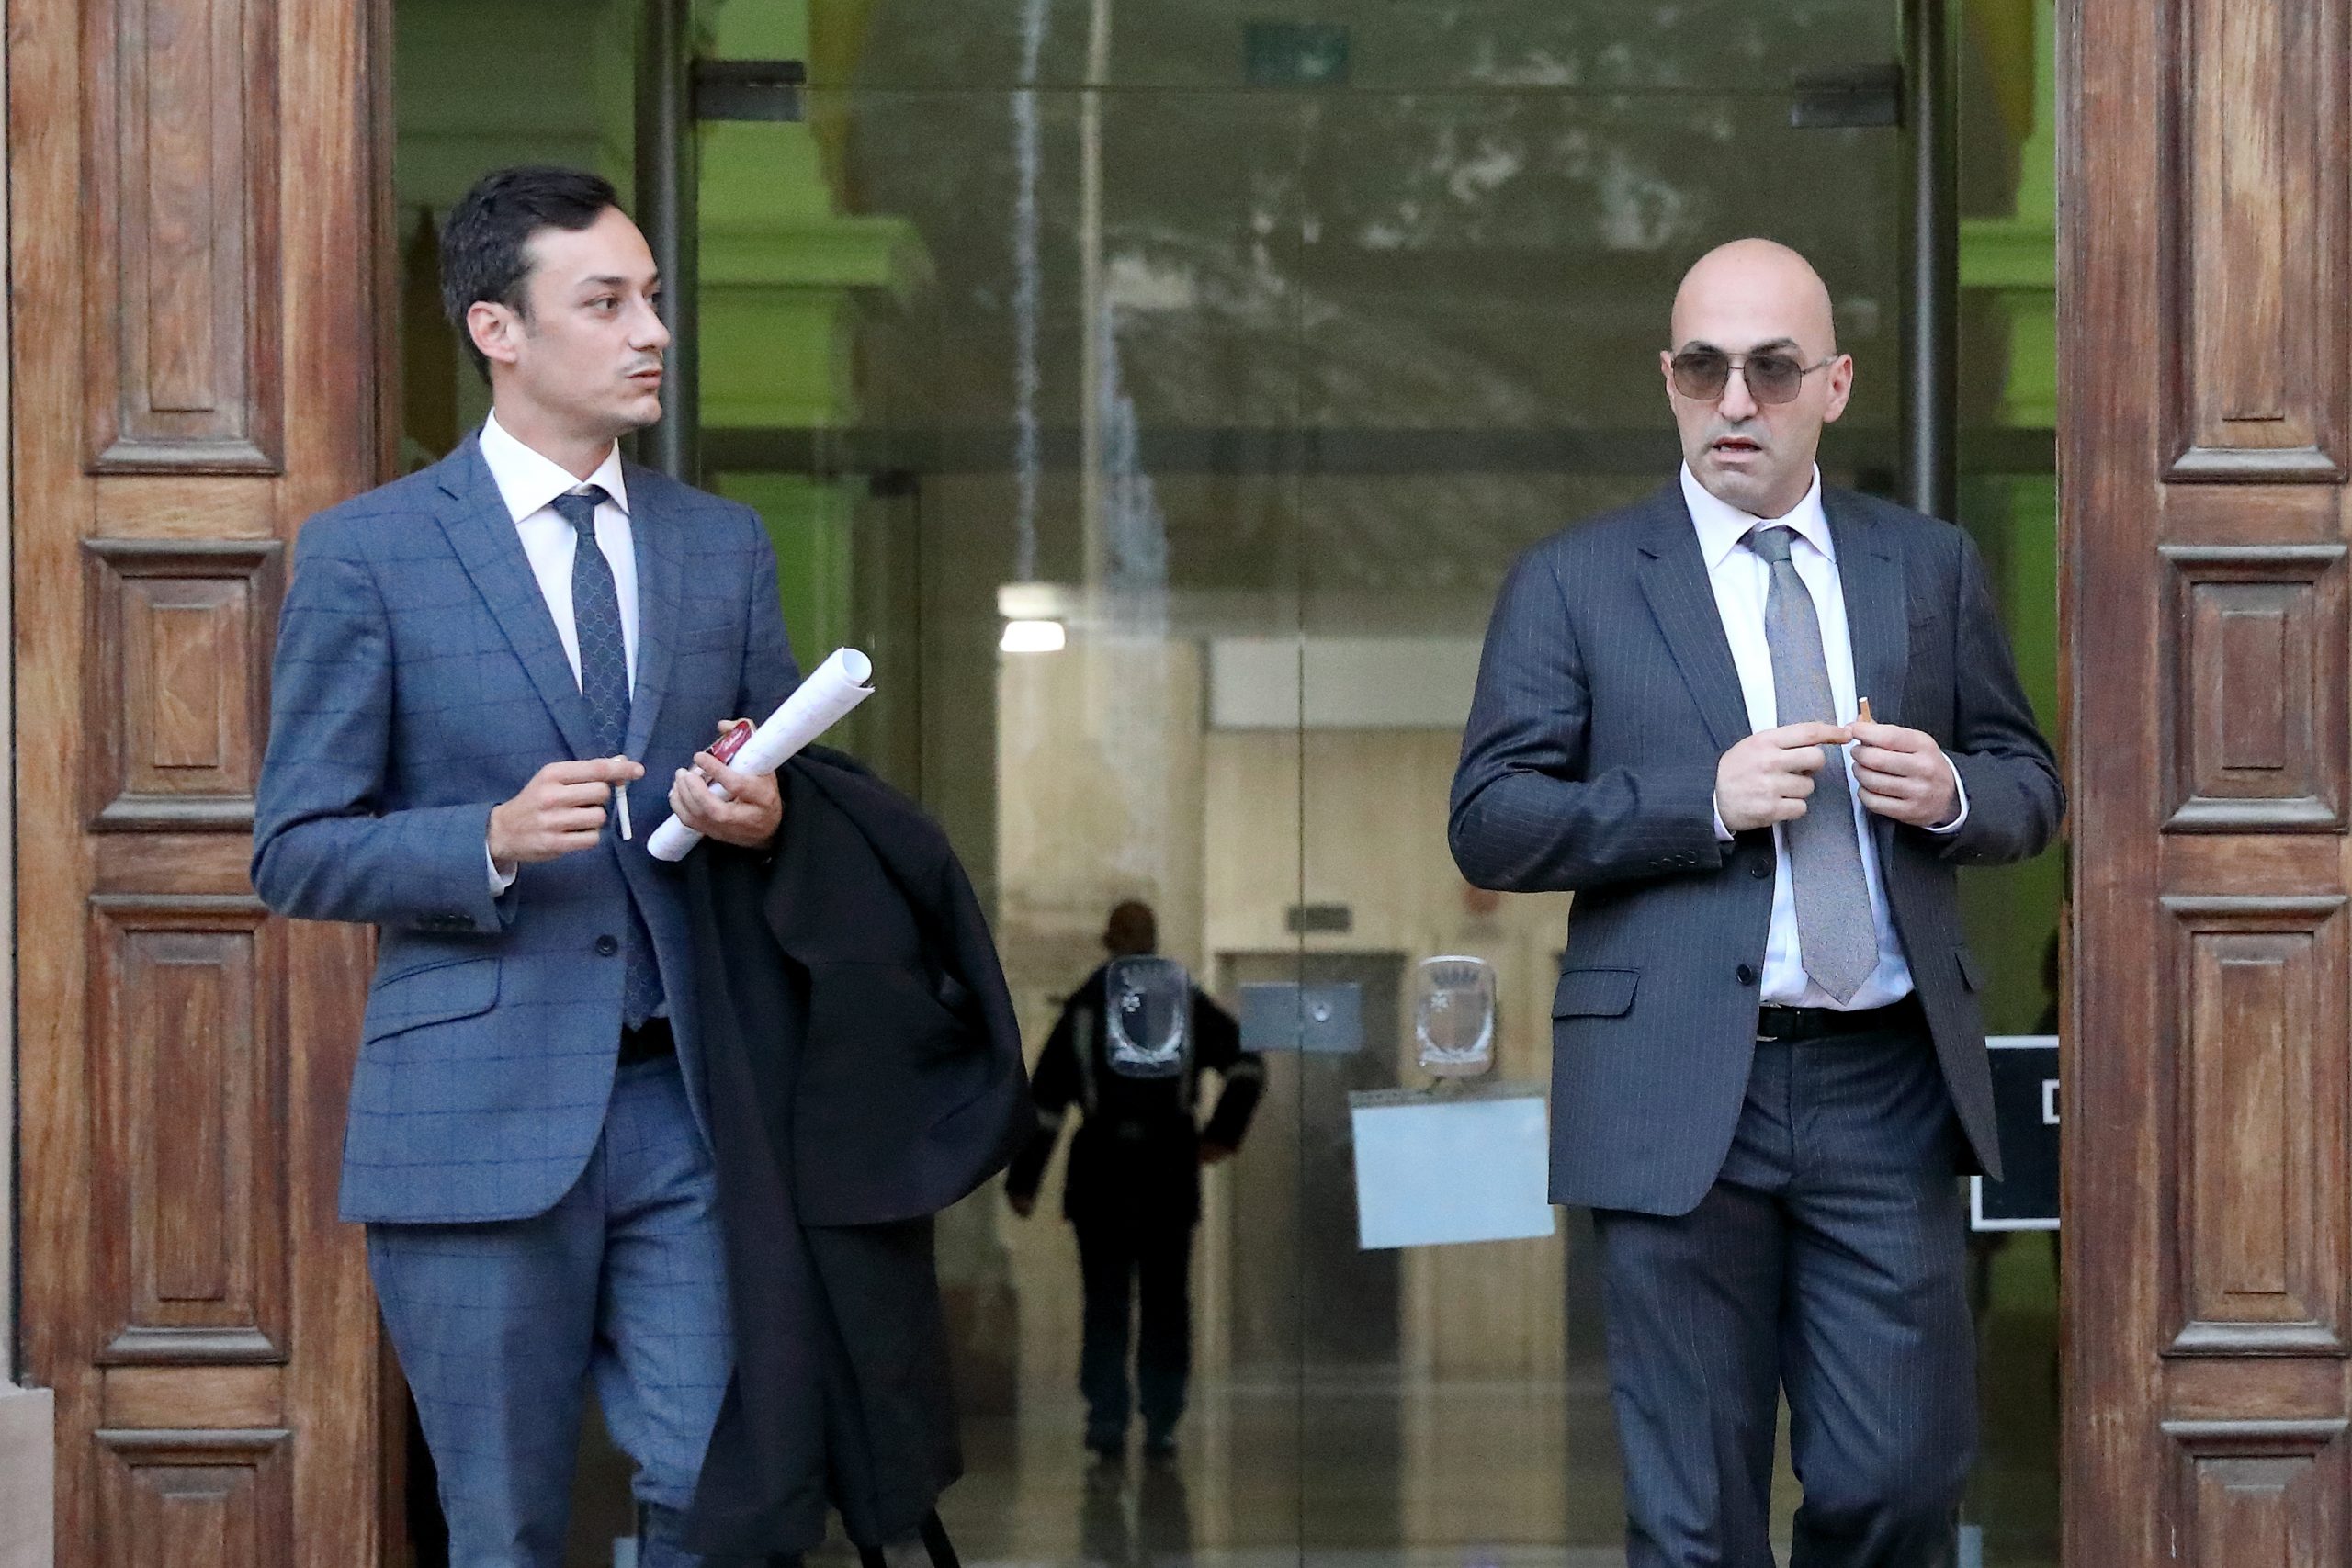 epa08033564 Entrepreneur Yorgen Fenech (R) leaves with an unidentified man the Malta Law Courts, in Valletta, Malta, 29 November, 2019. Fenech's lawyers request to have the chief investigator in the Daphne Caruana Glizia murder case removed.  Maltese authorities had arrested Yorgen Fenech on 20 November as a person of interest in investigations into the October 2017 car bomb murder of Maltese journalist Daphne Caruana Galizia.  EPA/DOMENIC AQUILINA